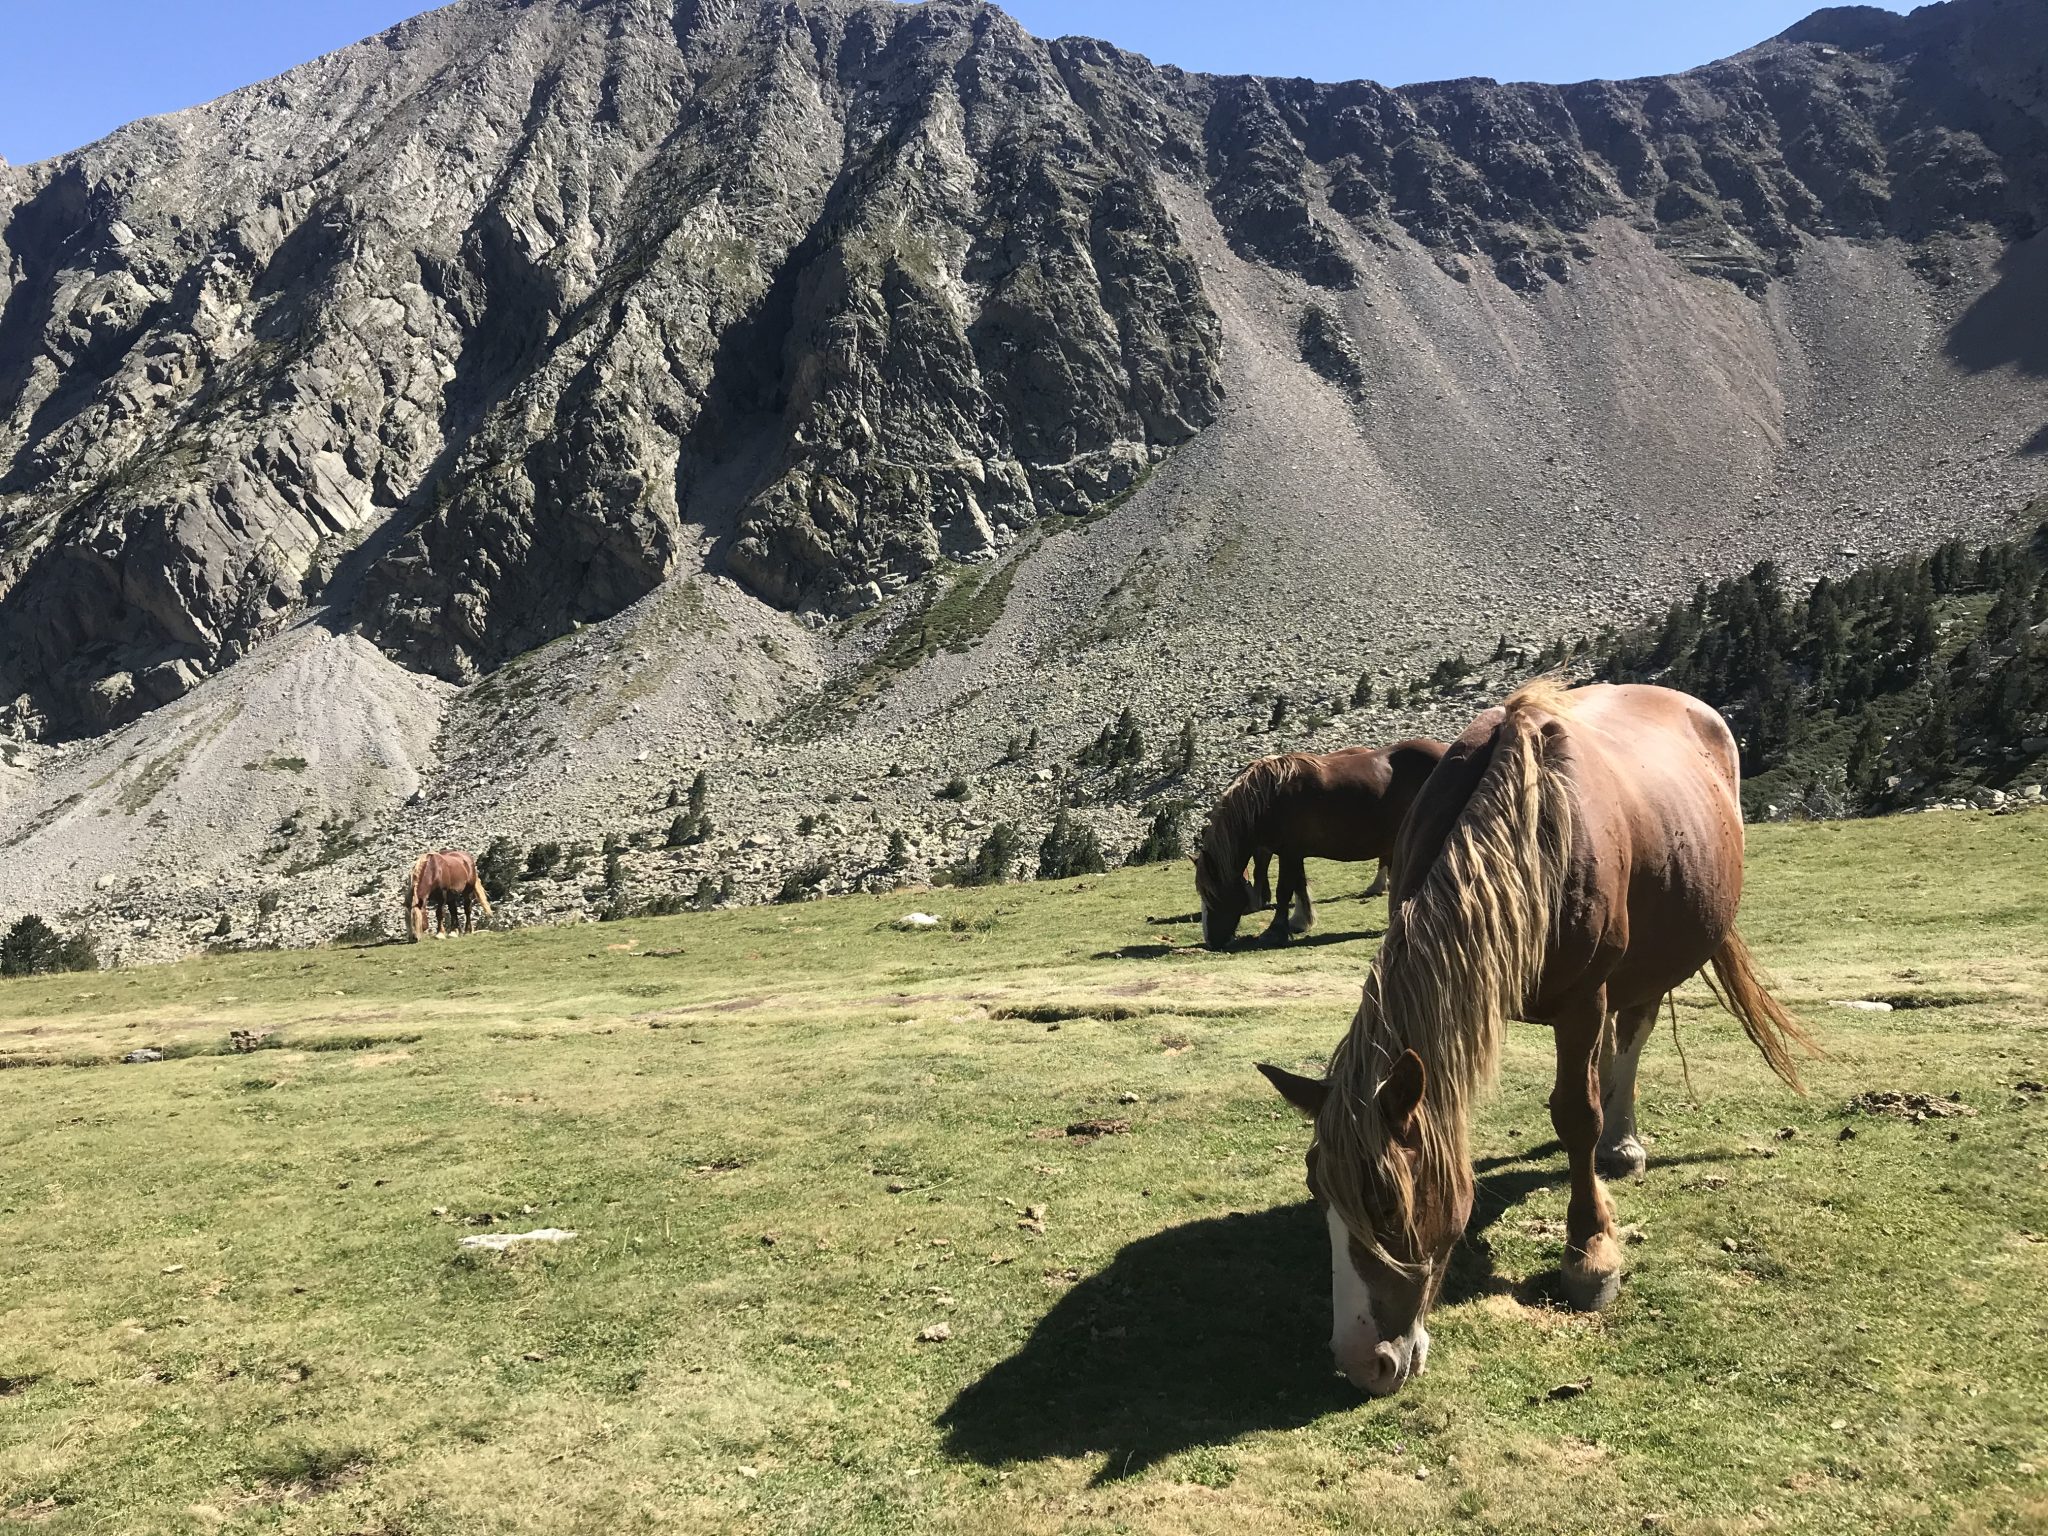 A brown horse eating grass in the mountains